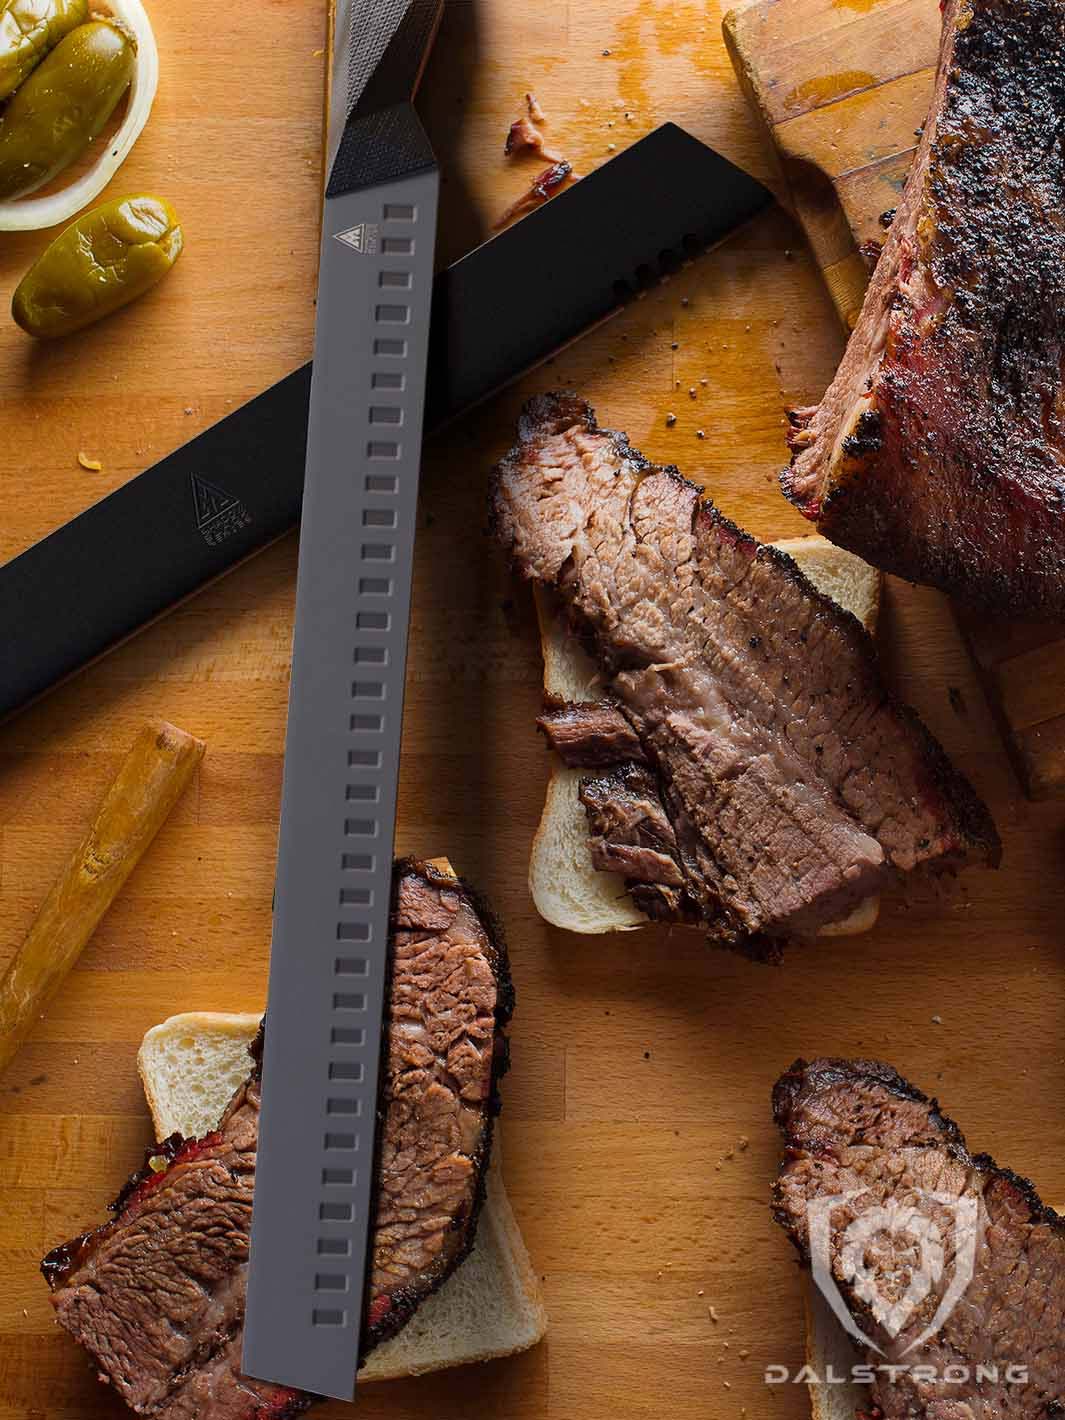 Dalstrong shadow black series 14 inch slicer knife with slices of brisket on a wooden table.